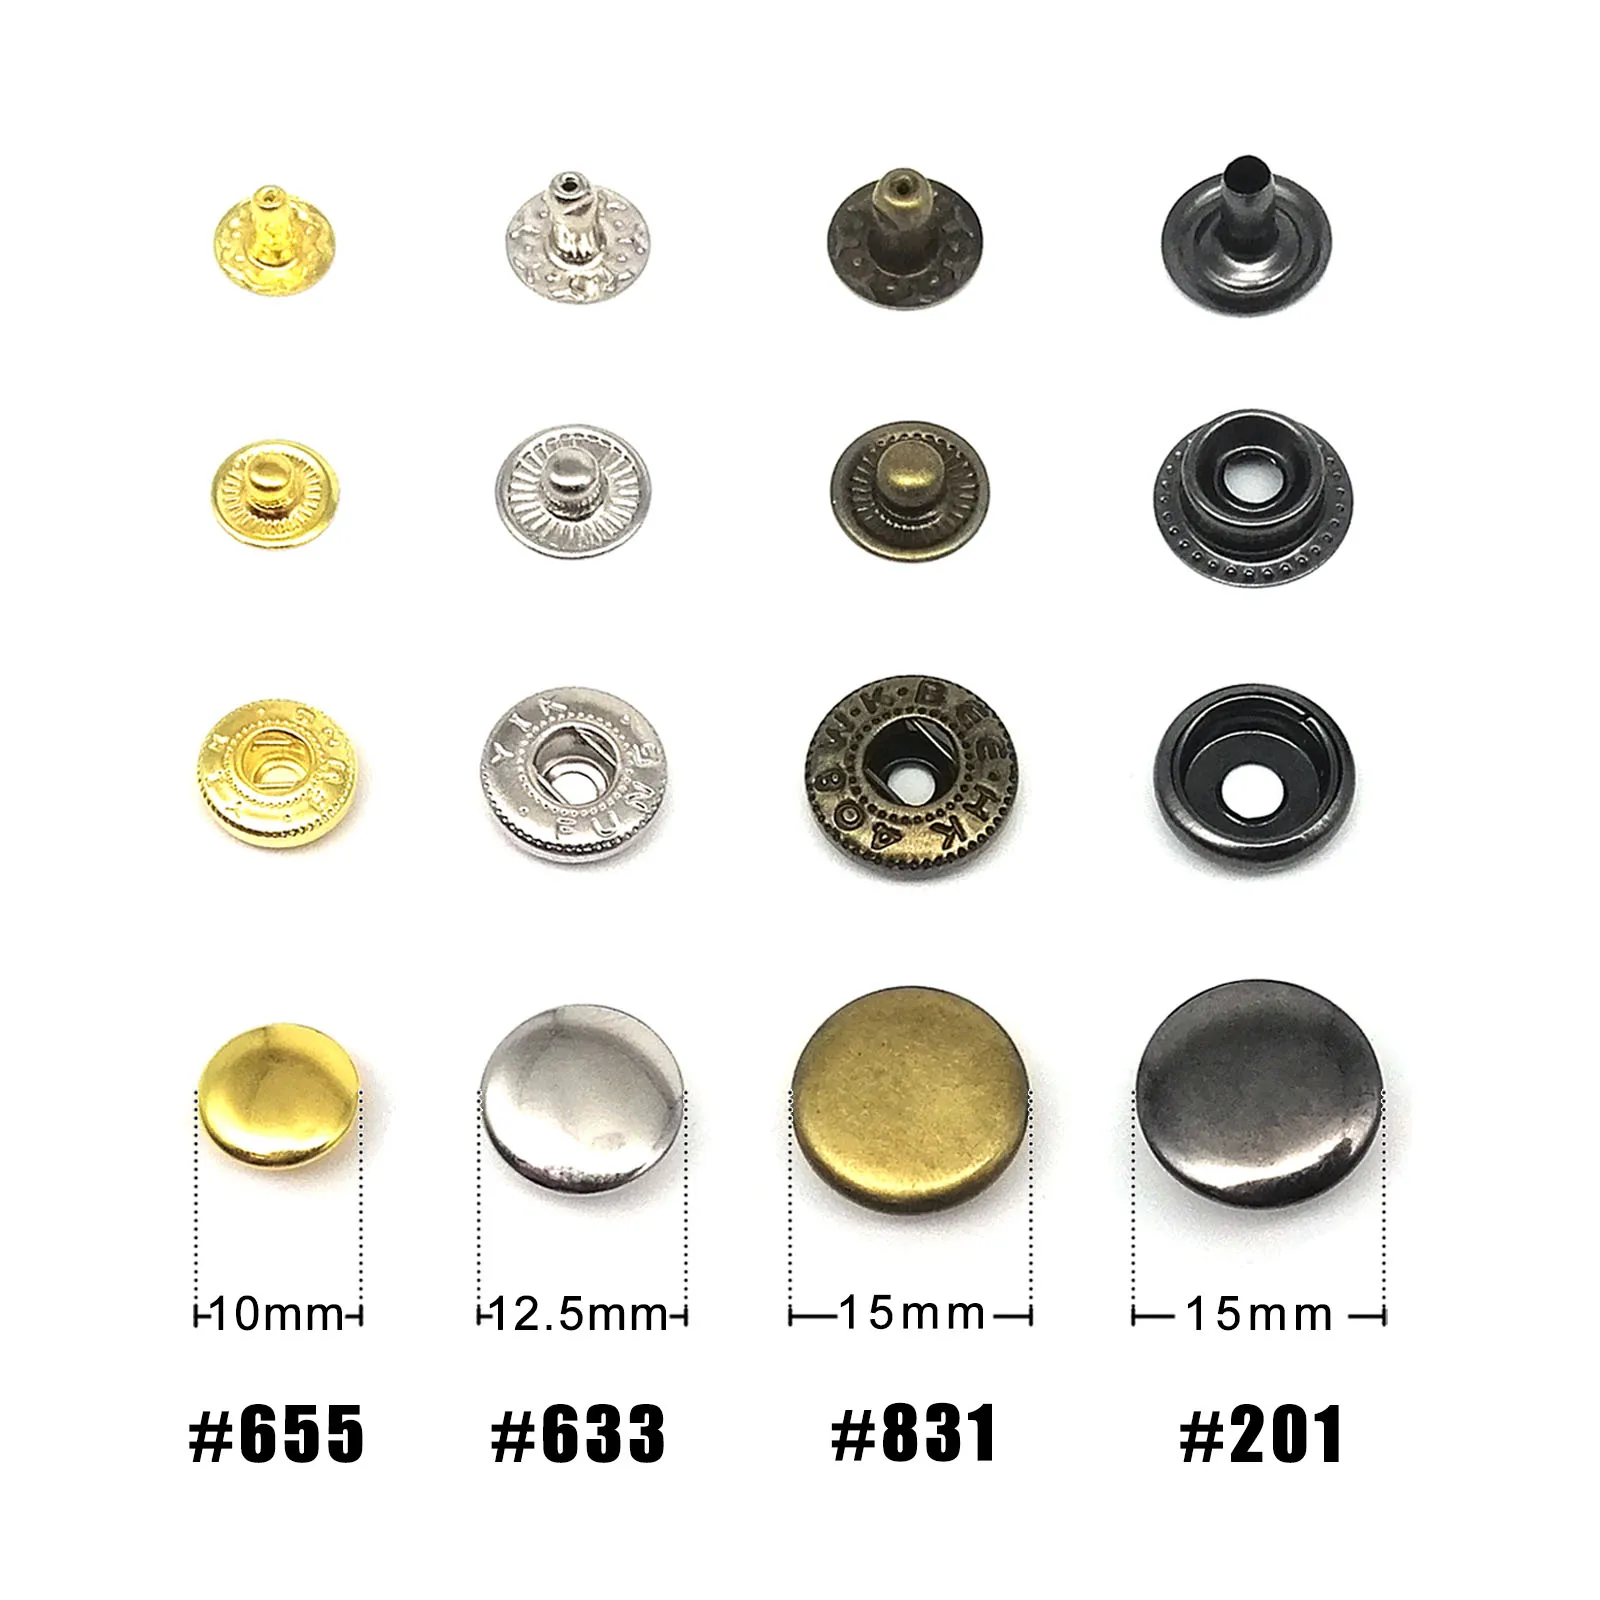 50sets Multi-Size Silver Color Metal Snap Fasteners Press Studs Snaps  Button 10mm #655, 12.5mm #633, 15mm #831